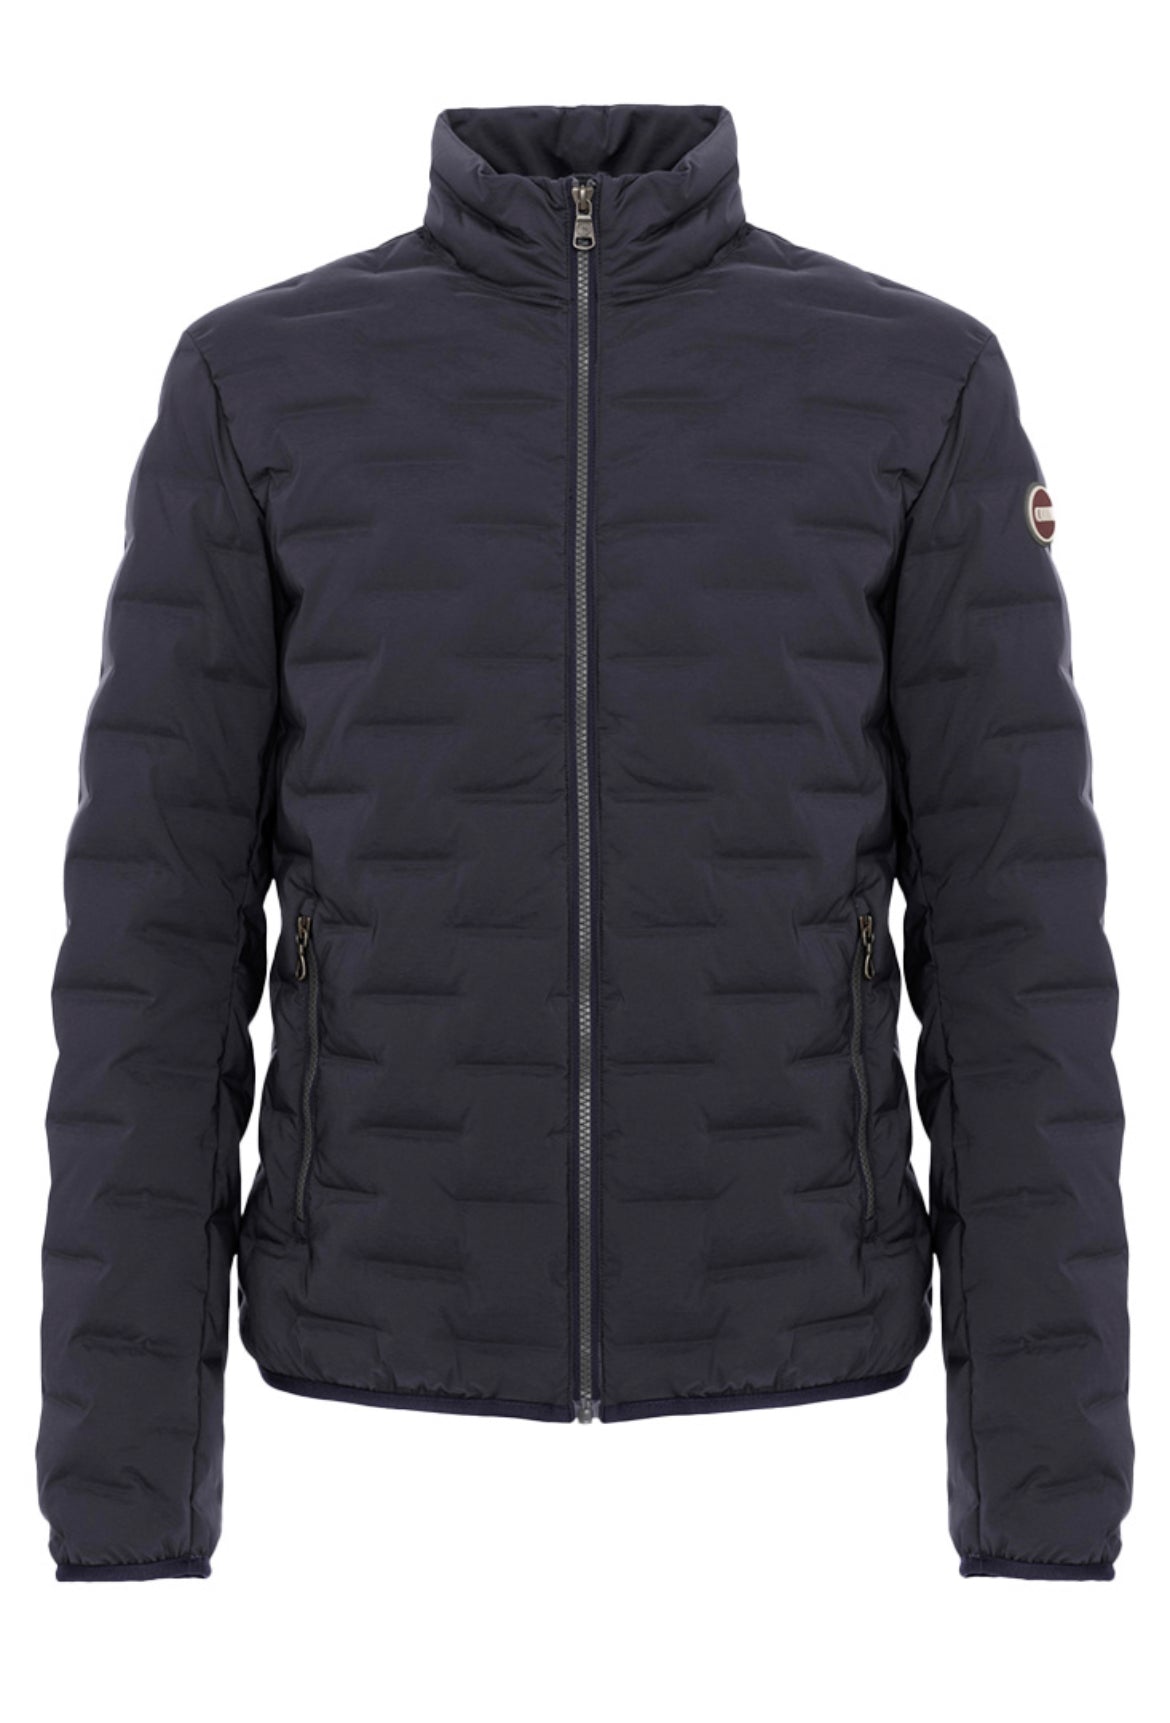 Colmar Quilted Jacket – Navy